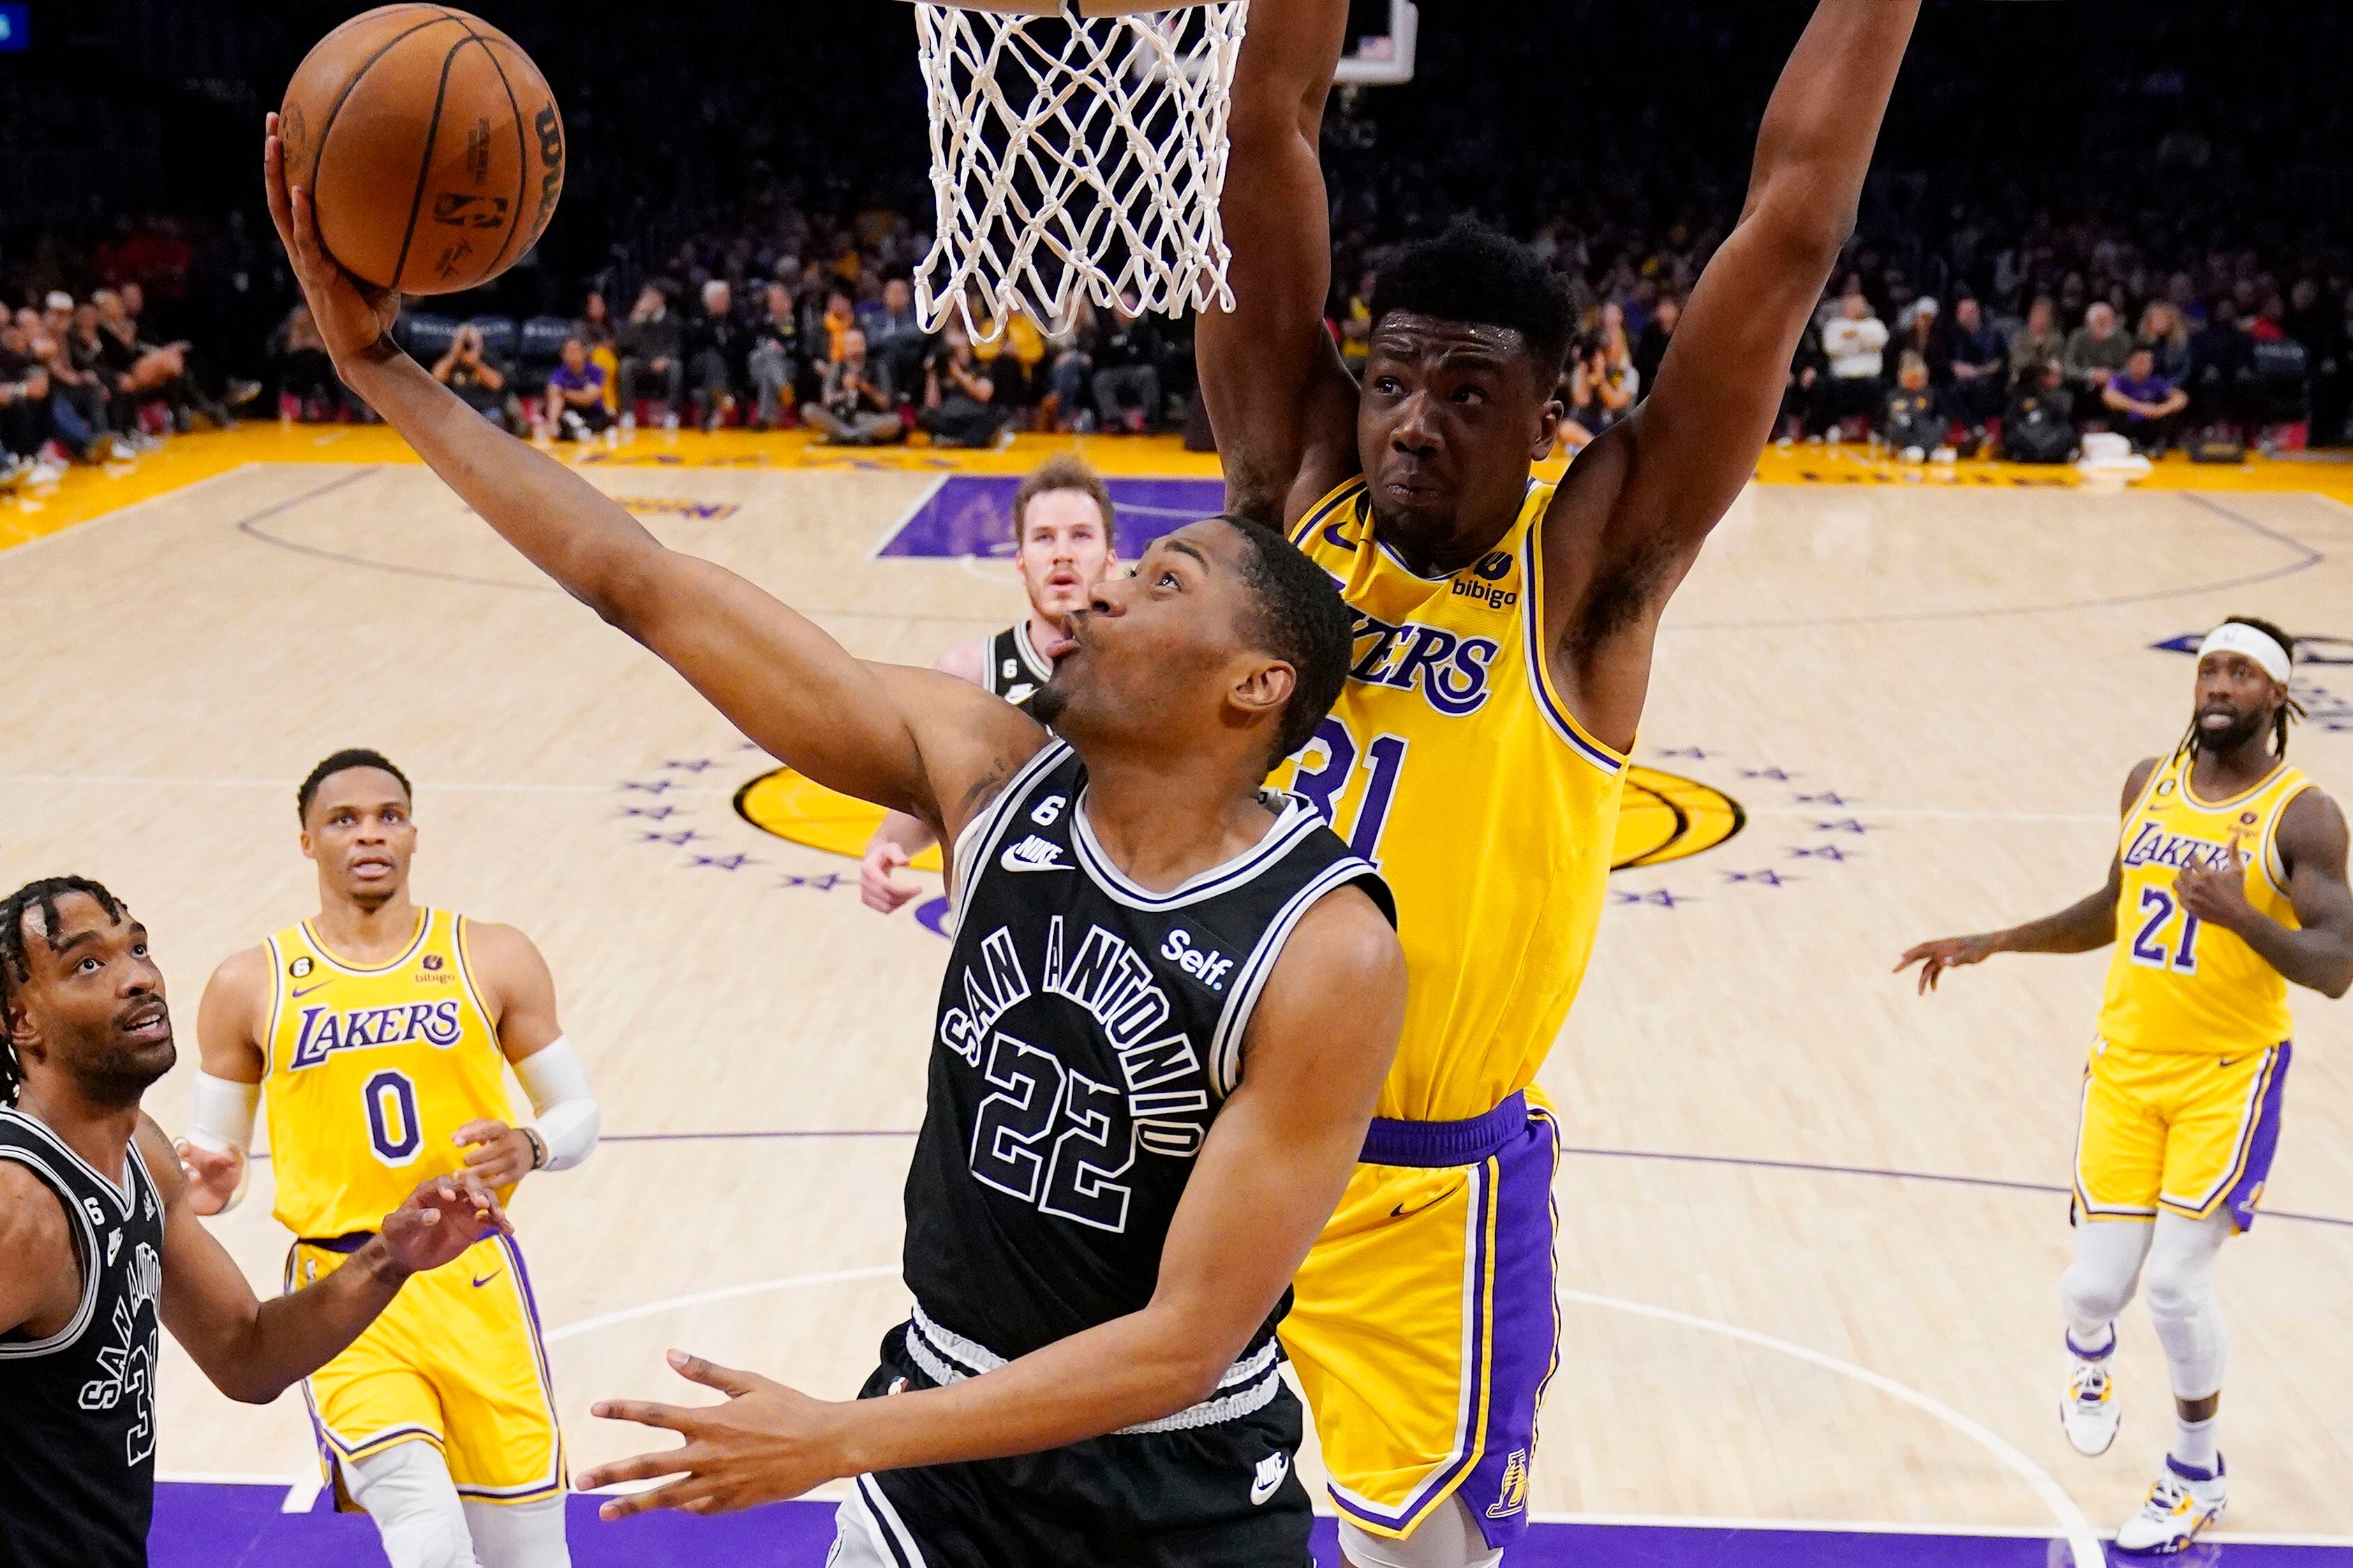 San Antonio Spurs guard Malaki Branham (22) shoots as Los Angeles Lakers center Thomas Bryant defends during the first half of an NBA basketball game Wednesday, Jan. 25, 2023, in Los Angeles. (AP Photo/Mark J. Terrill)